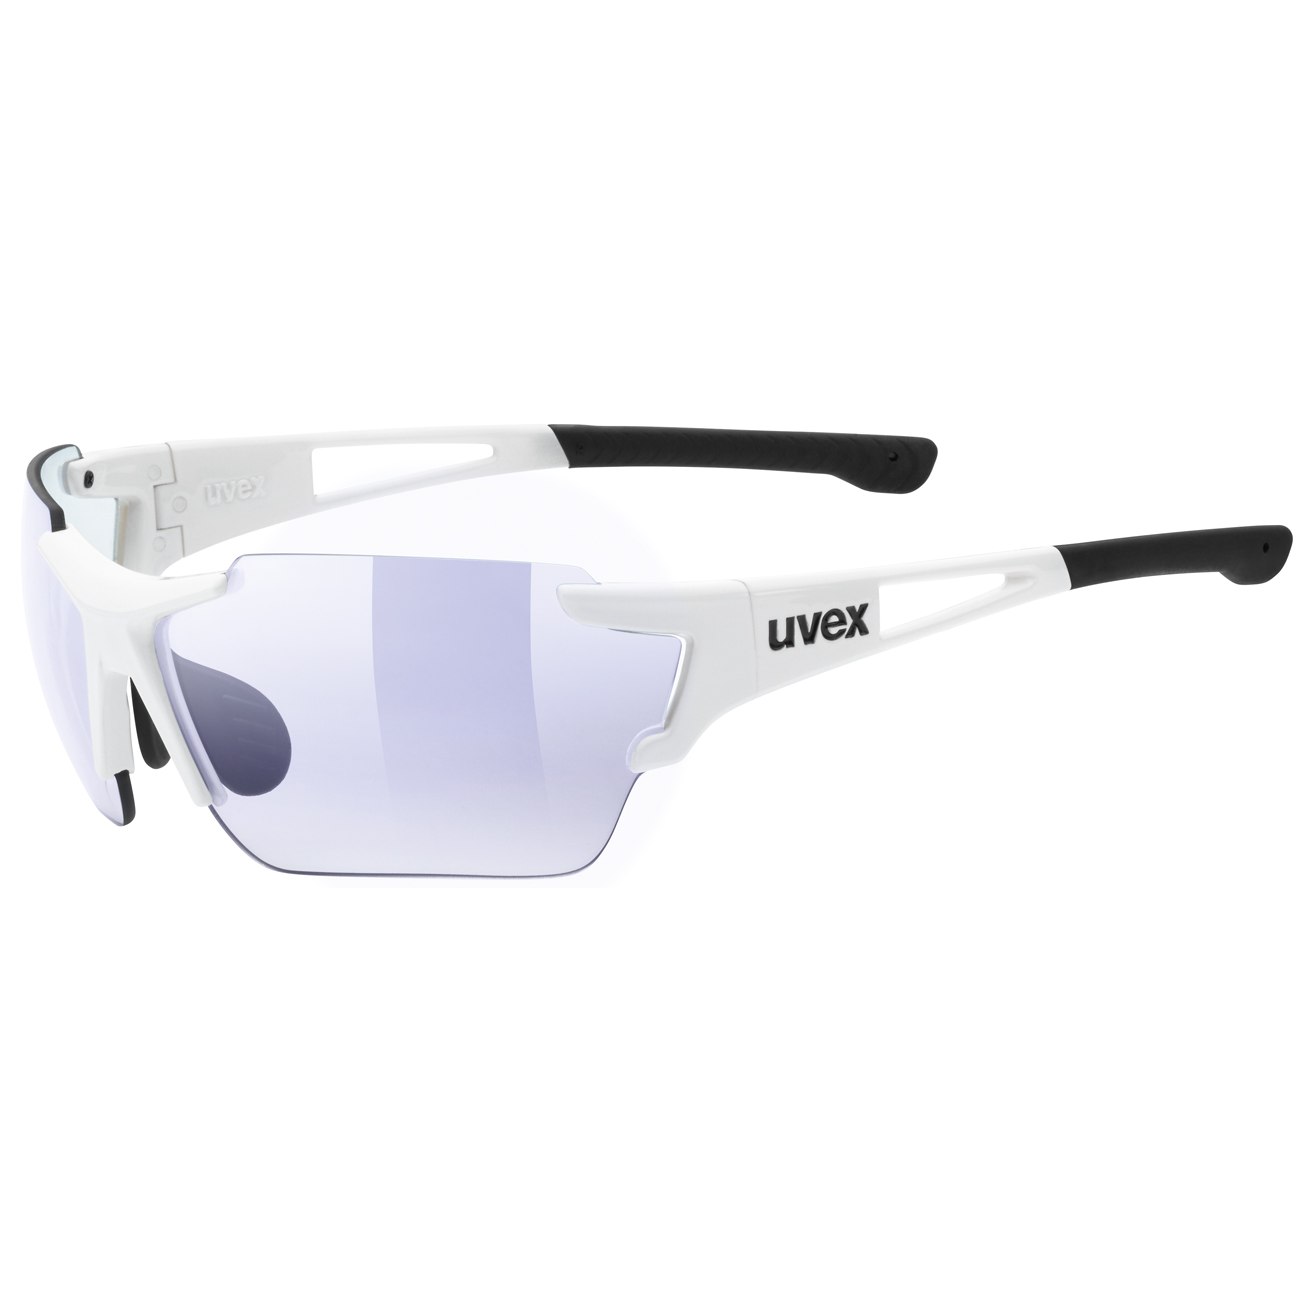 Picture of Uvex sportstyle 803 Race Glasses - white/variomatic litemirror blue